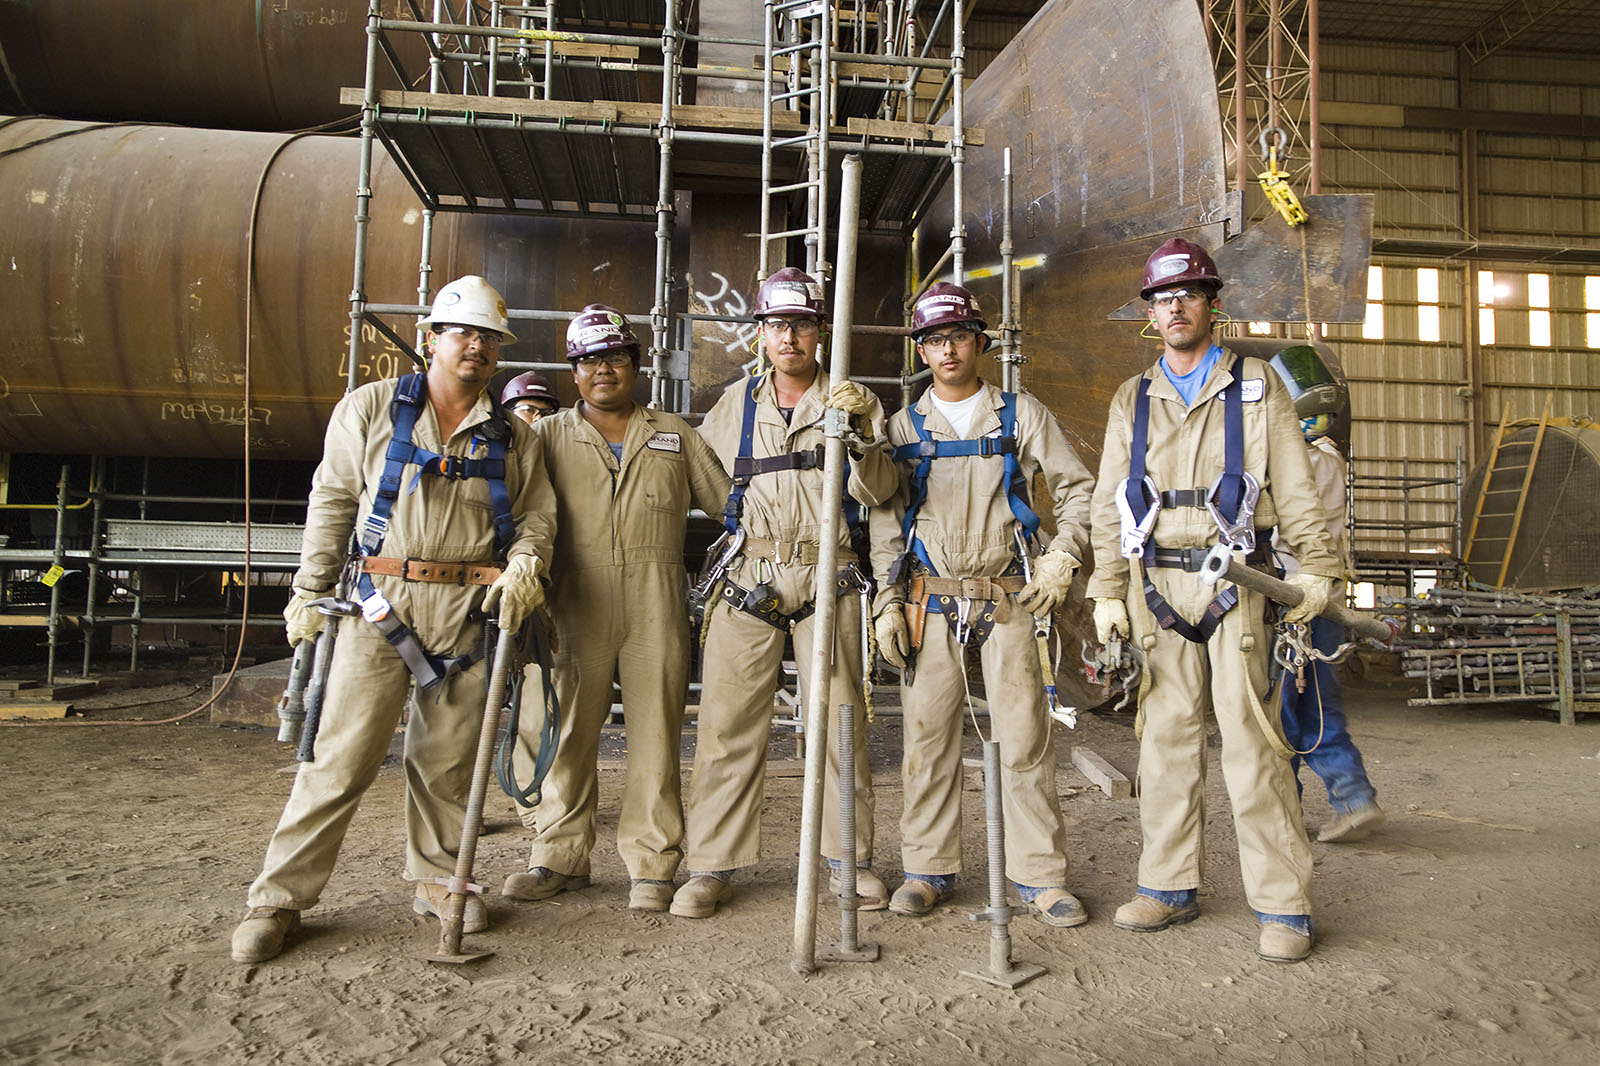 A team of five industrial workers in their protective gear